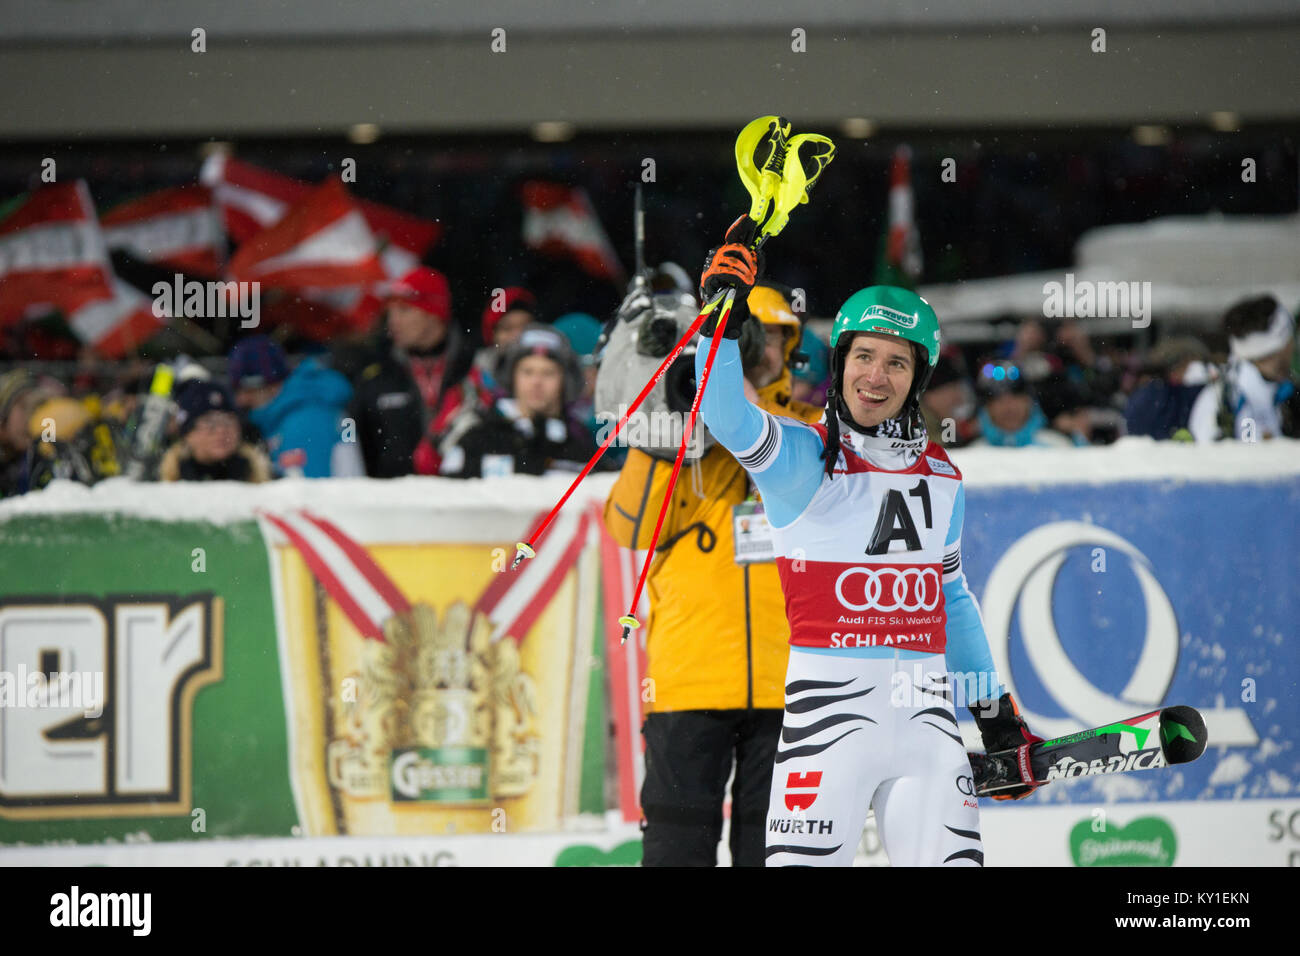 Felix Neureuther from Germany still leads the discipline standings after tonight’s slalom race in Schladming where he ended third. Photo credit: Christoph Oberschneider. Stock Photo